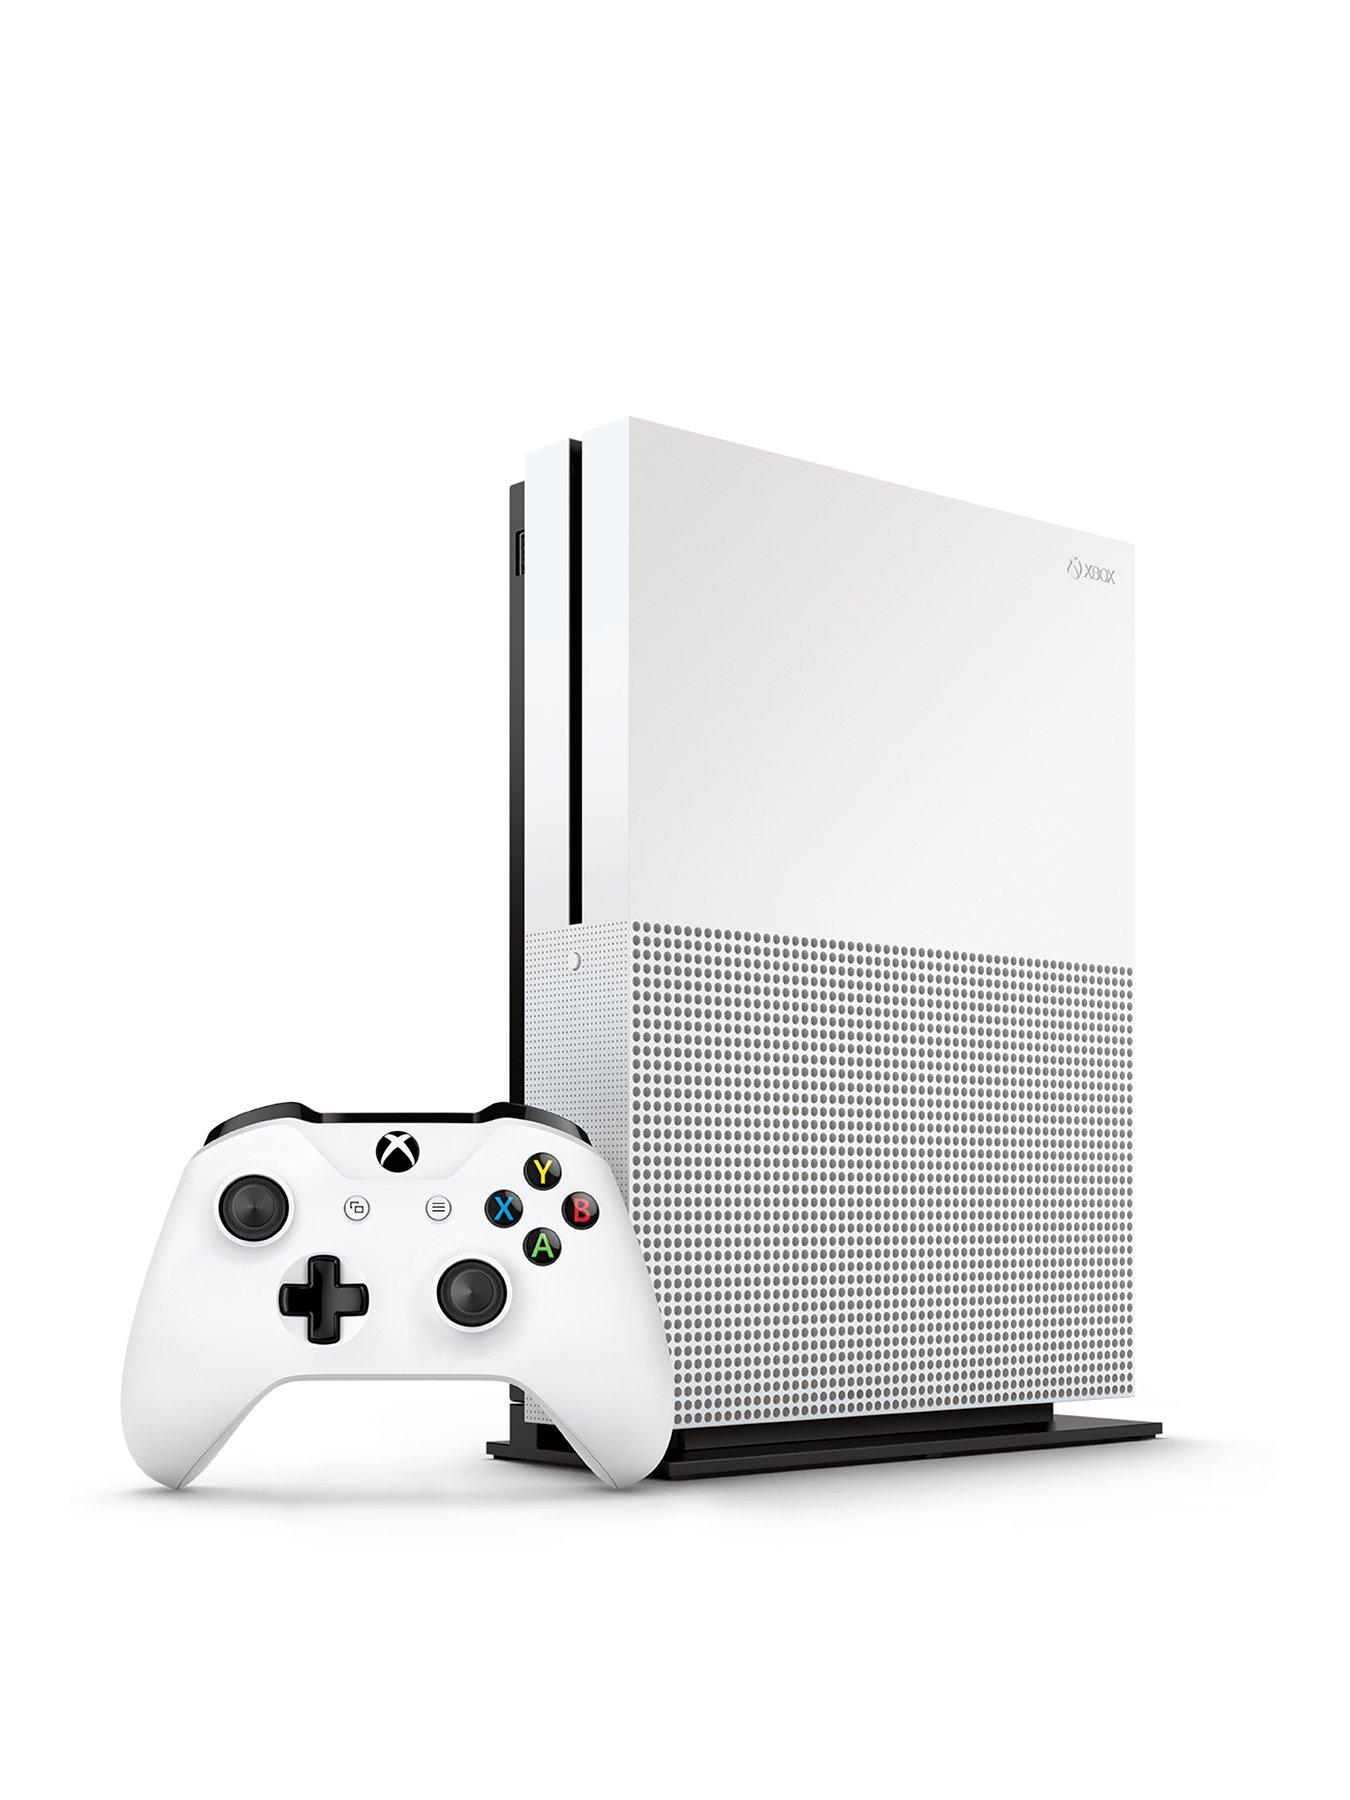 Xbox One Xbox One S, 1 white controller, GPU 1 month for £1 dash offer -  1TB Console | very.co.uk